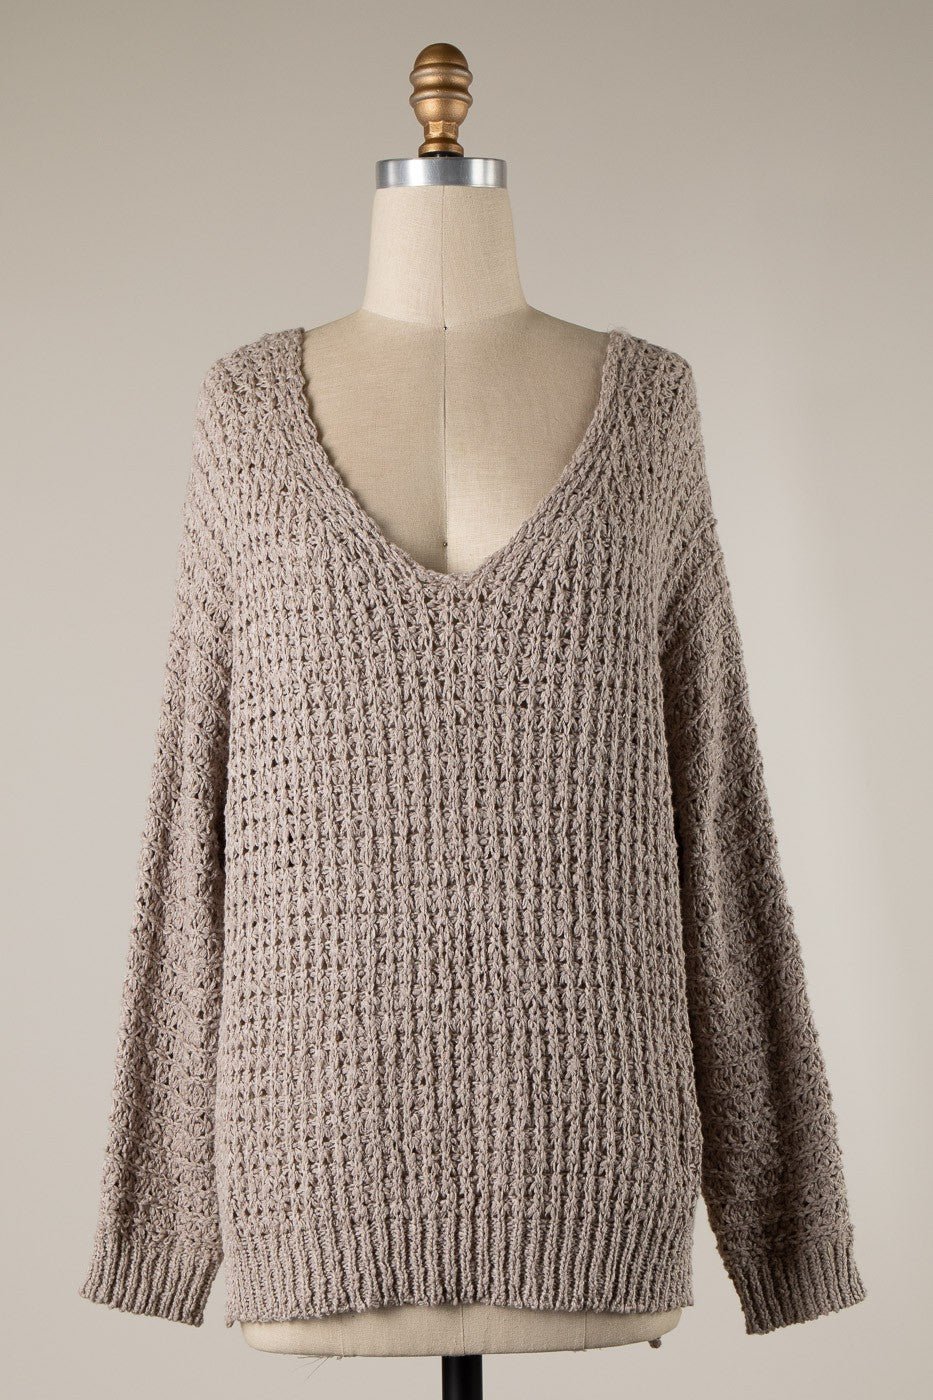 Vintage Cable Knit Sweater - Mocha